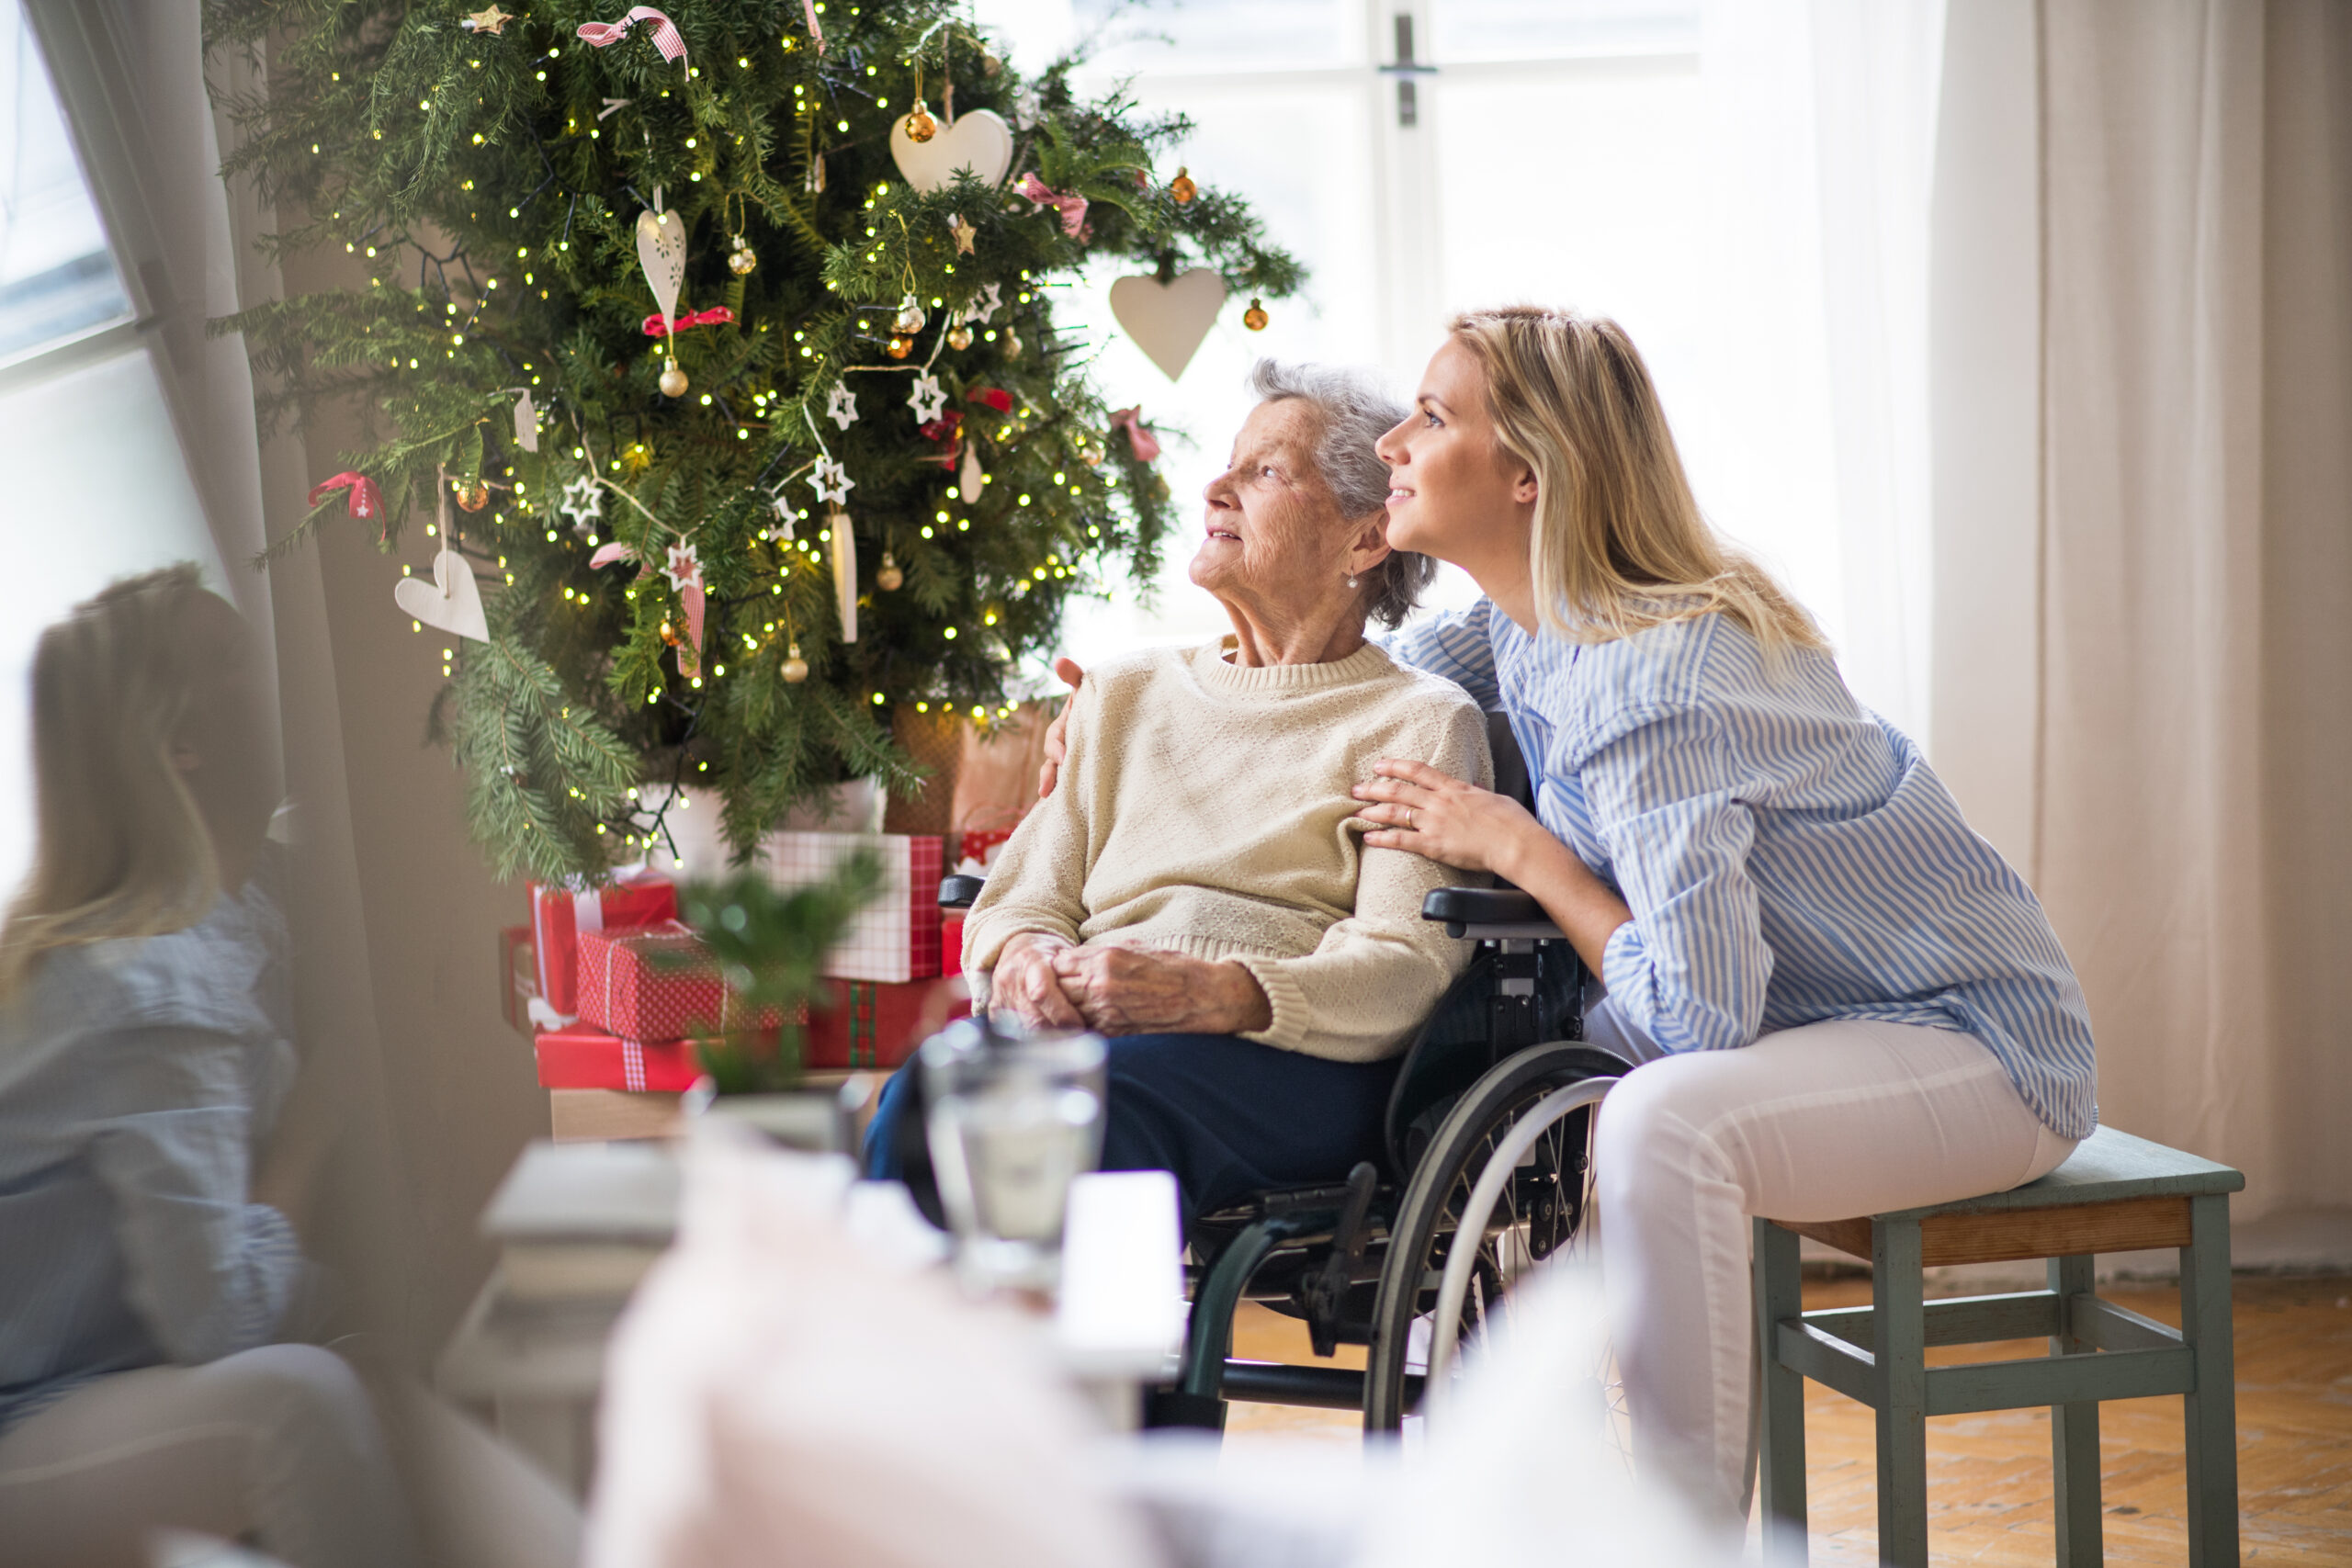 By managing holiday spending, seniors can spend this season alongside family without worry.